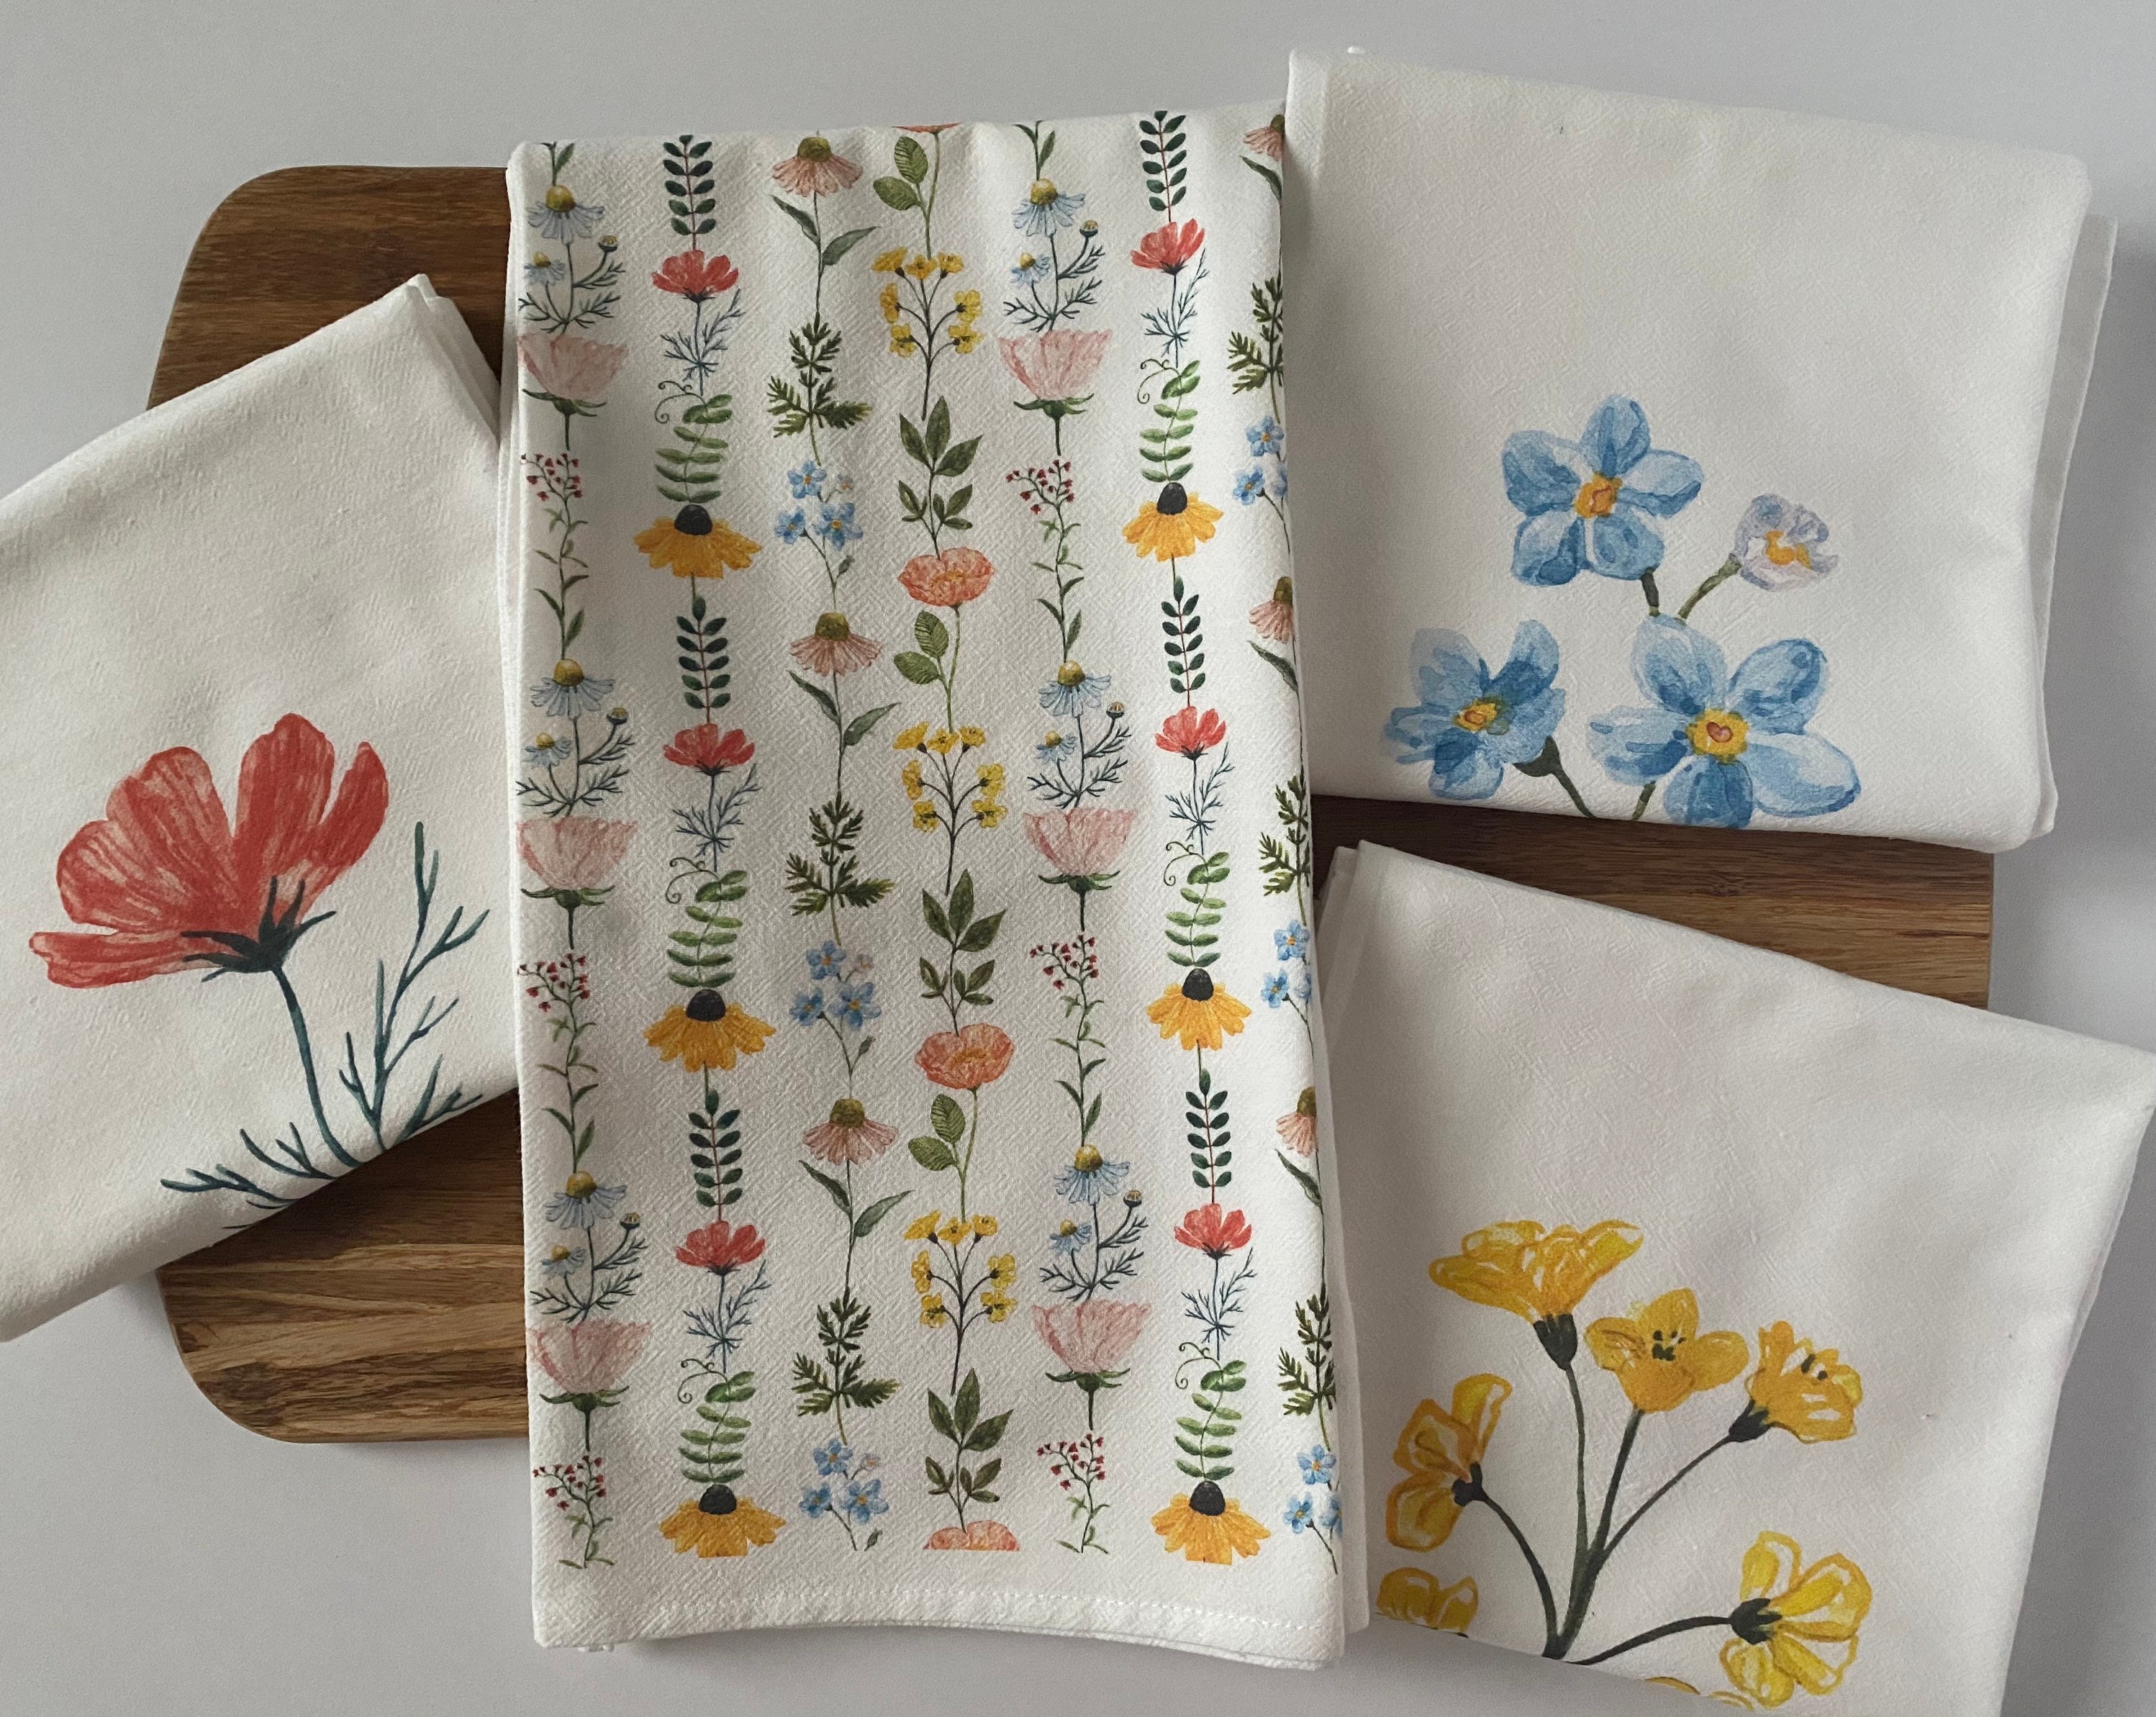 QEES 2 Pack Spring Kitchen Towels,Wildflower Floral Print Dish Towels for  Kitchen,18x26 Inch Ultra Absorbent Kitchen Hand Towels Decorative Set,Cute